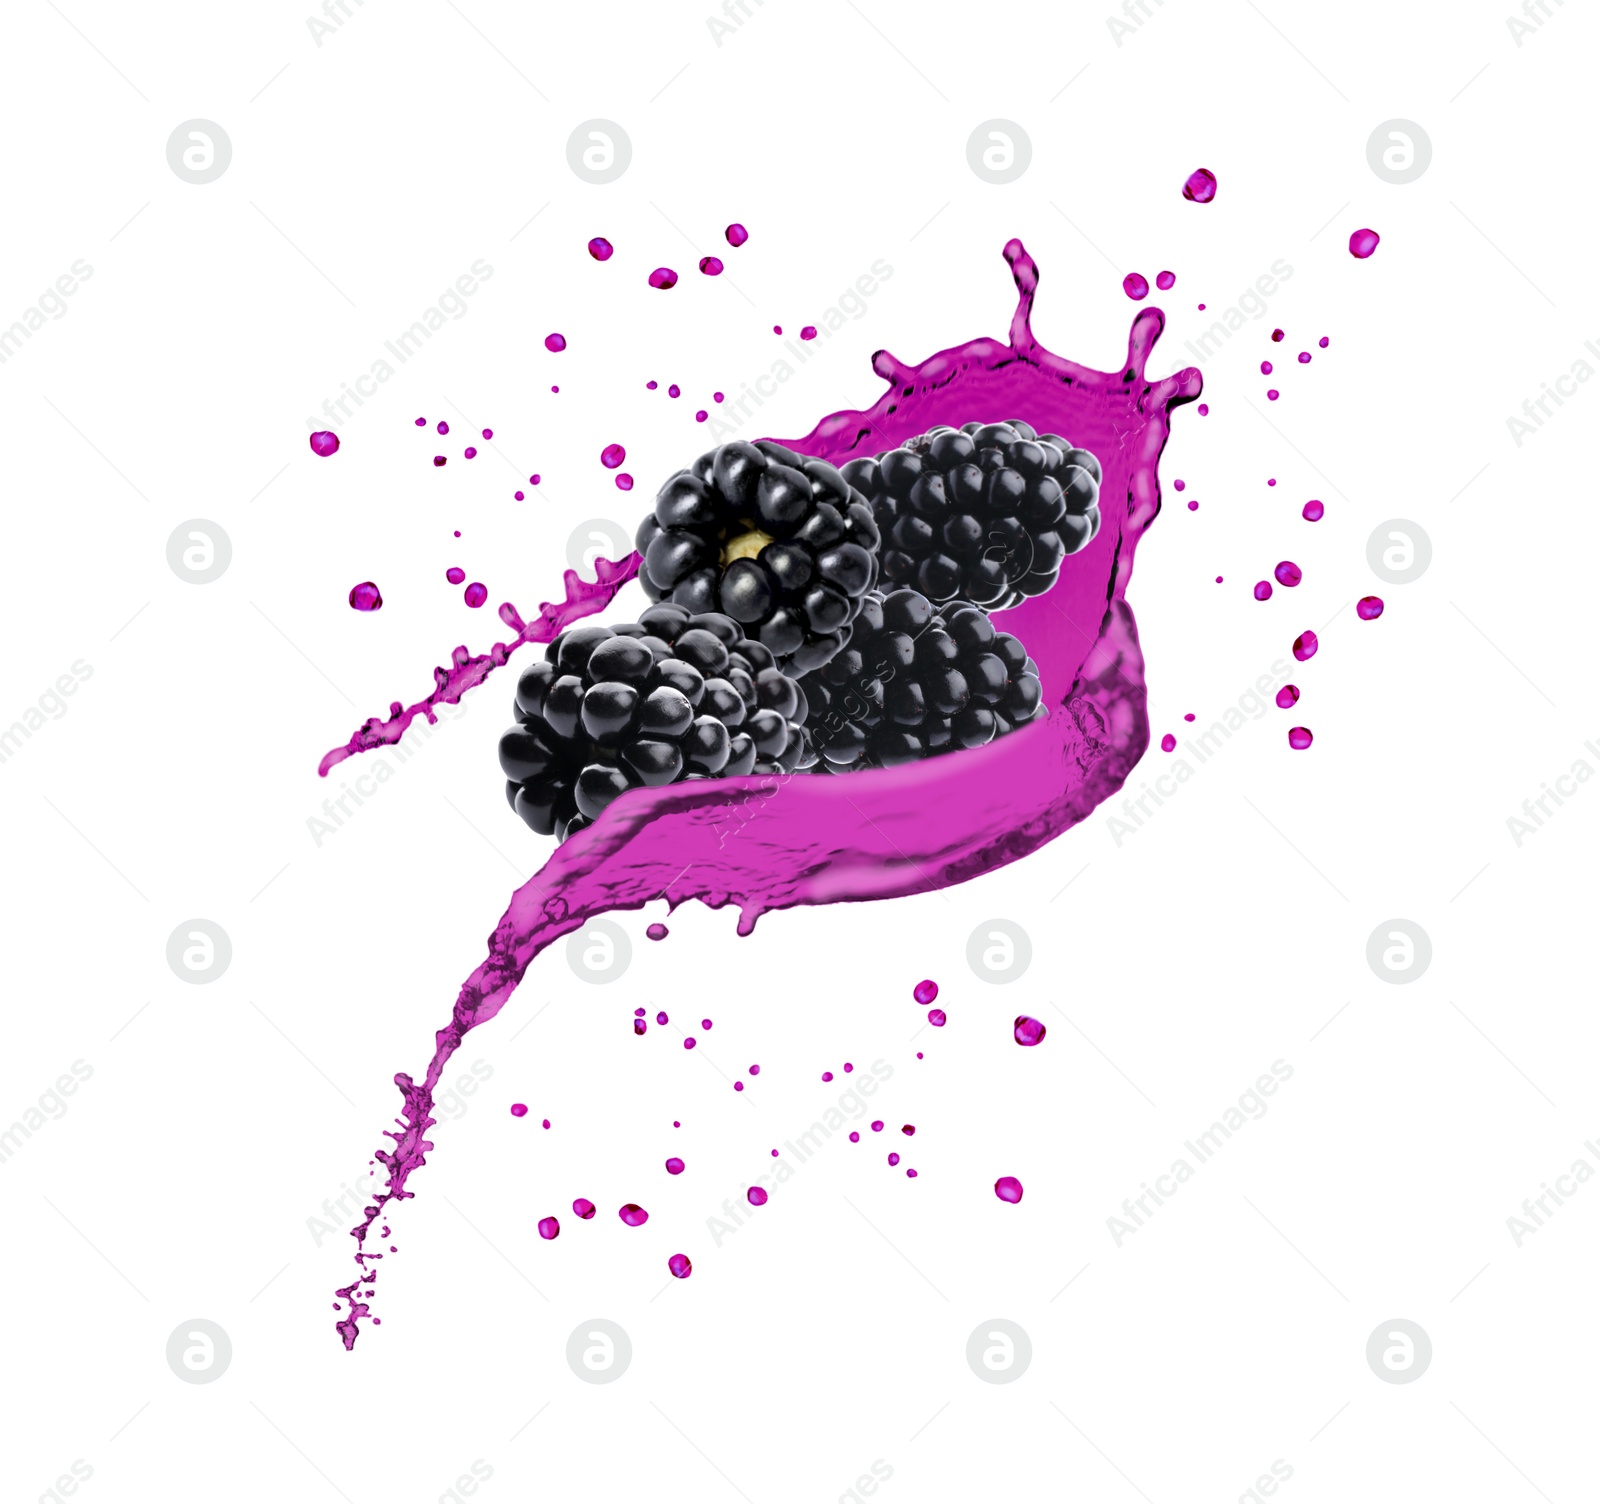 Image of Delicious ripe blackberries and splashes of juice on white background